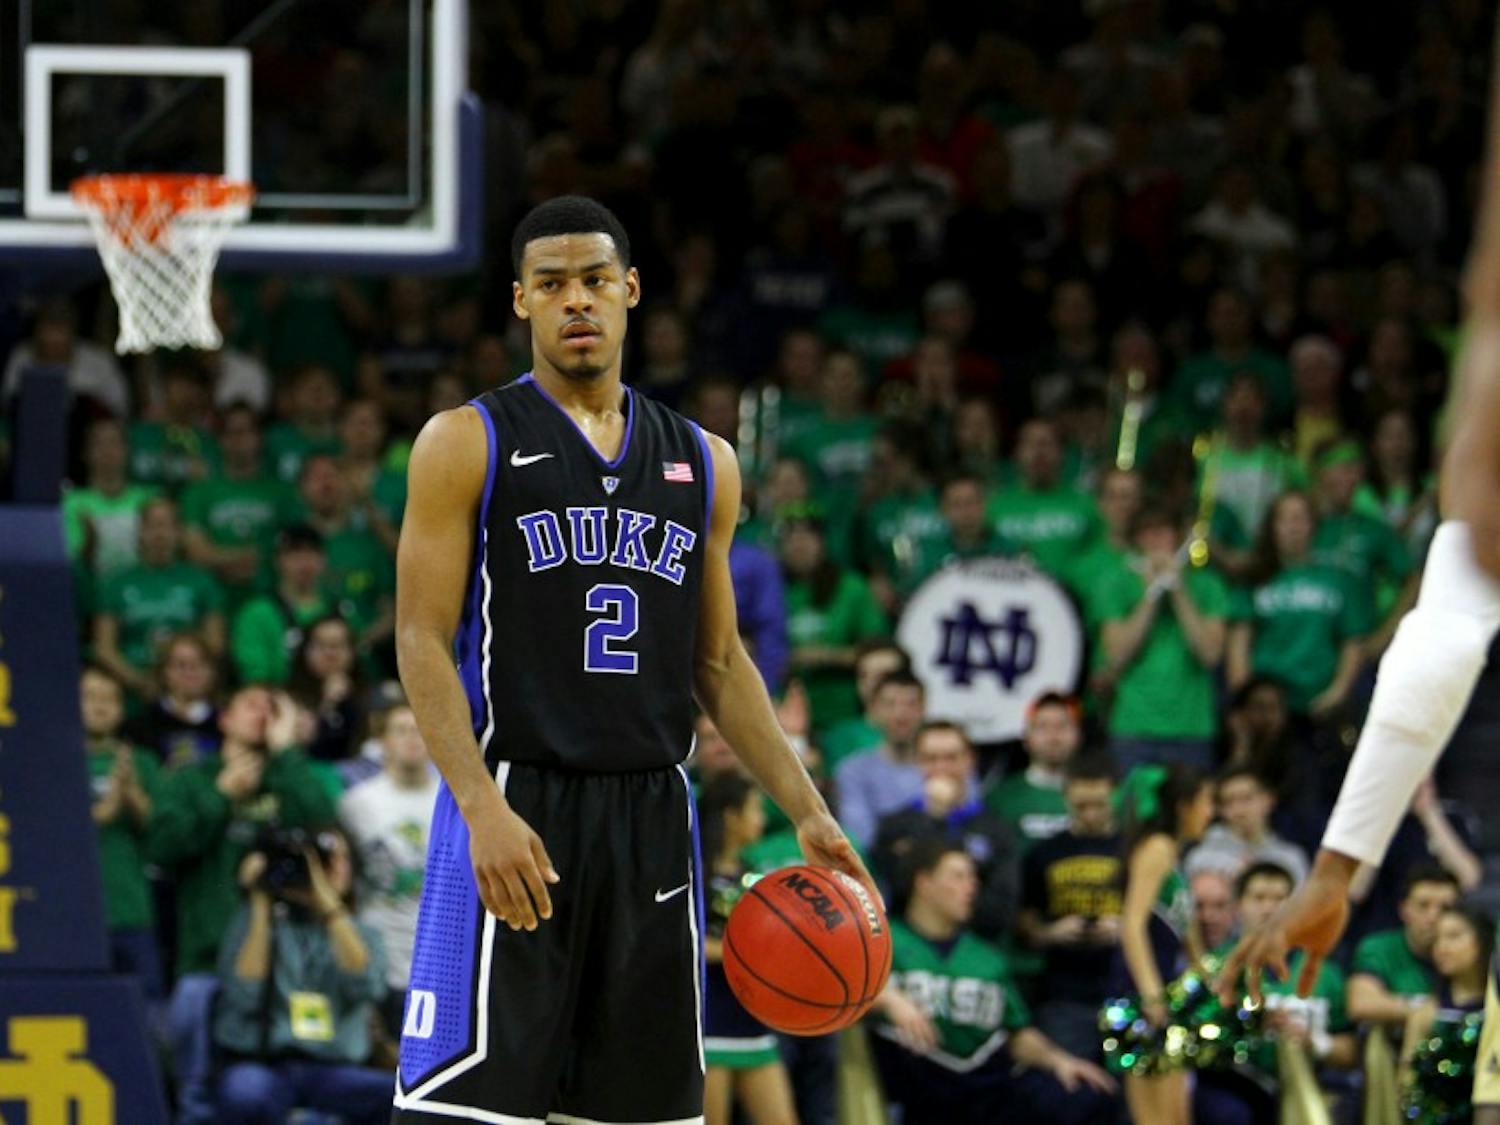 Point guard Quinn Cook scored 22 points, but Duke was upset on the road, falling to Notre Dame 79-77 in its first ACC contest of the season.